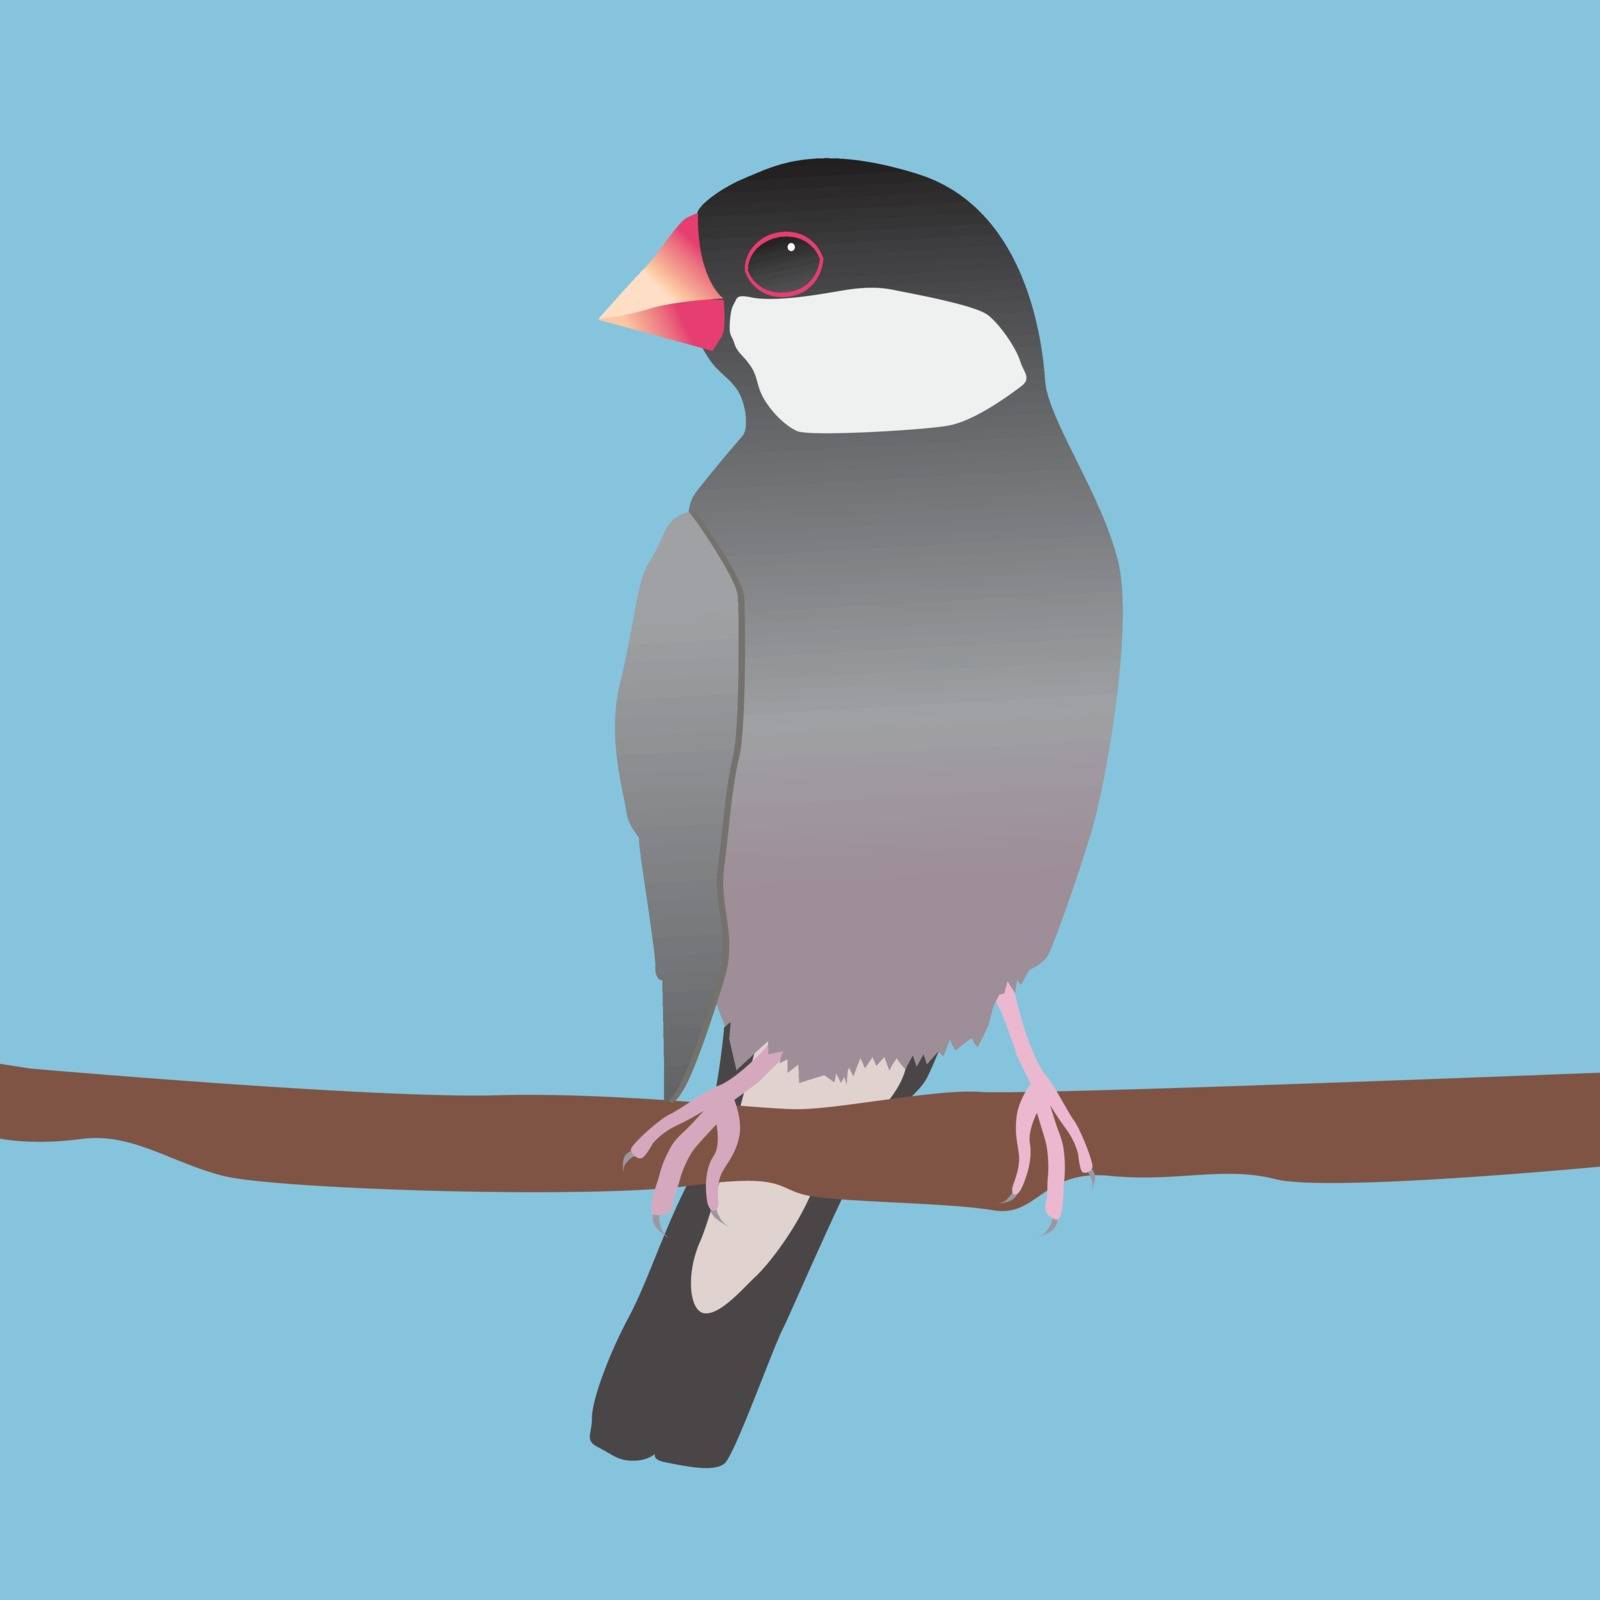 Java sparrow by Bwise